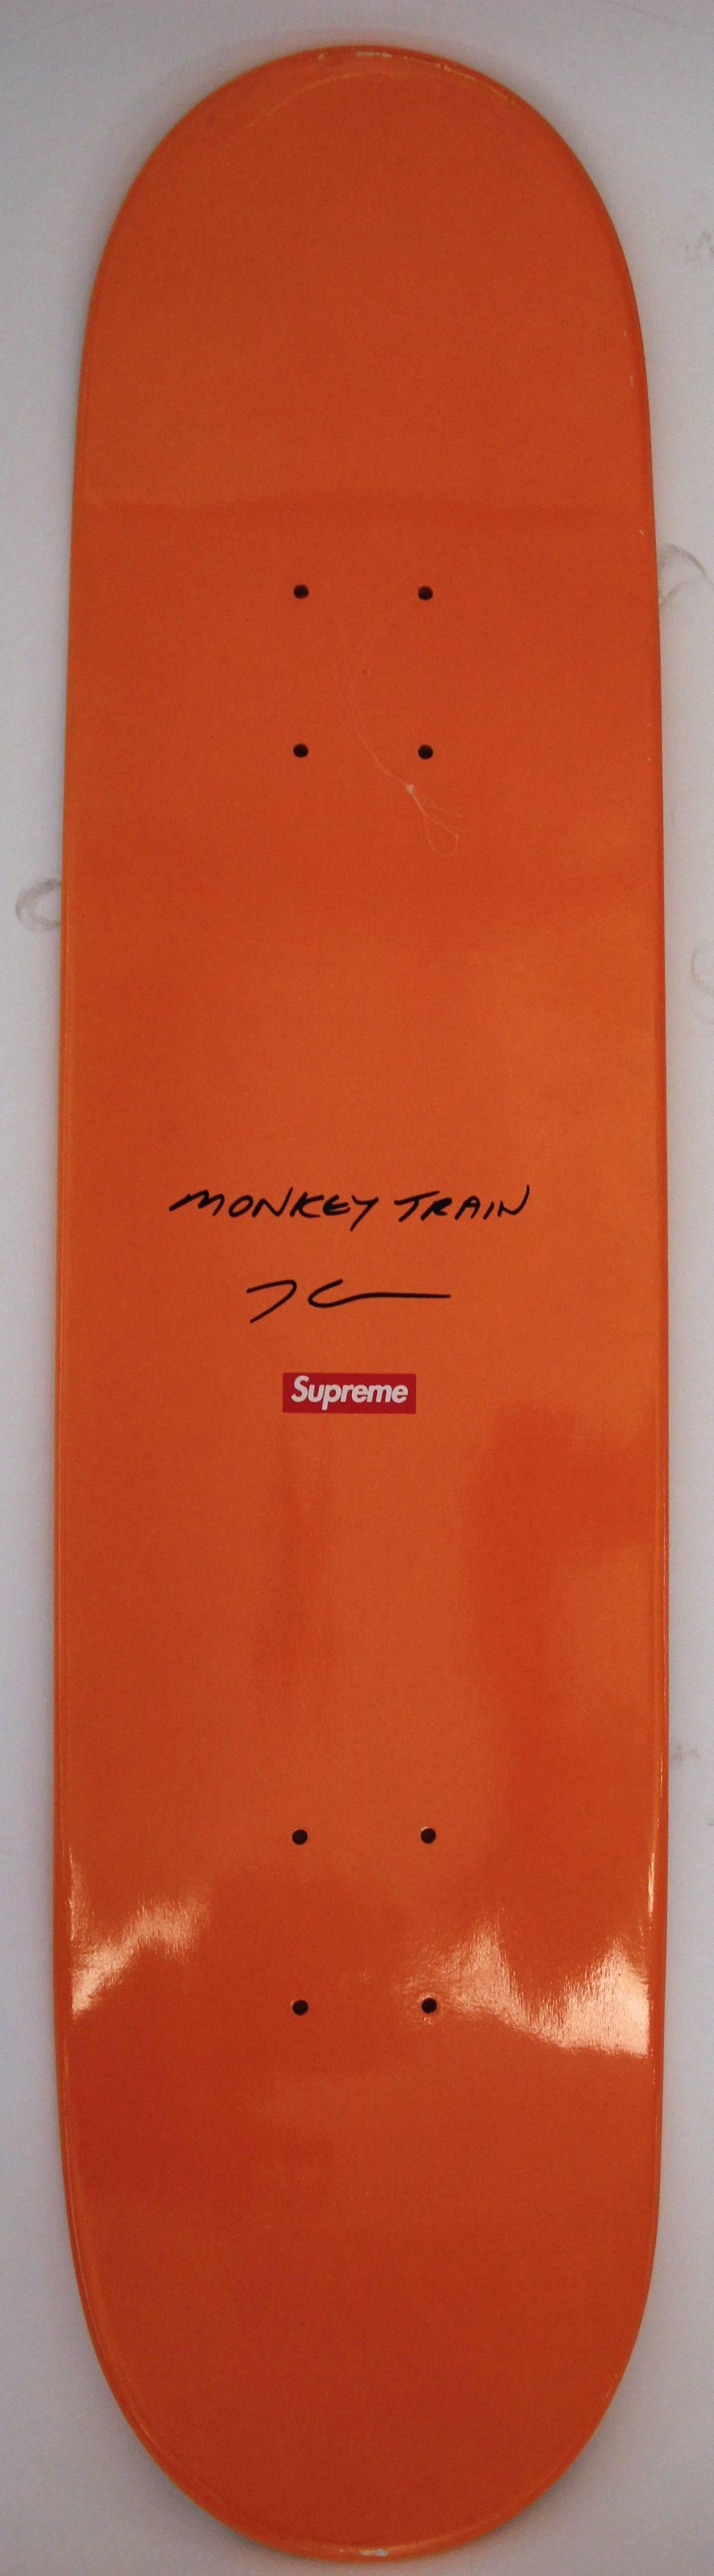 Jeff Koons (1955),
Monkey train skateboard deck,
Mark on the mixed skateboard technique supreme, 
limited edition,
circa 2006, Italy.
Measures: Height: 20 cm, width 80 cm.